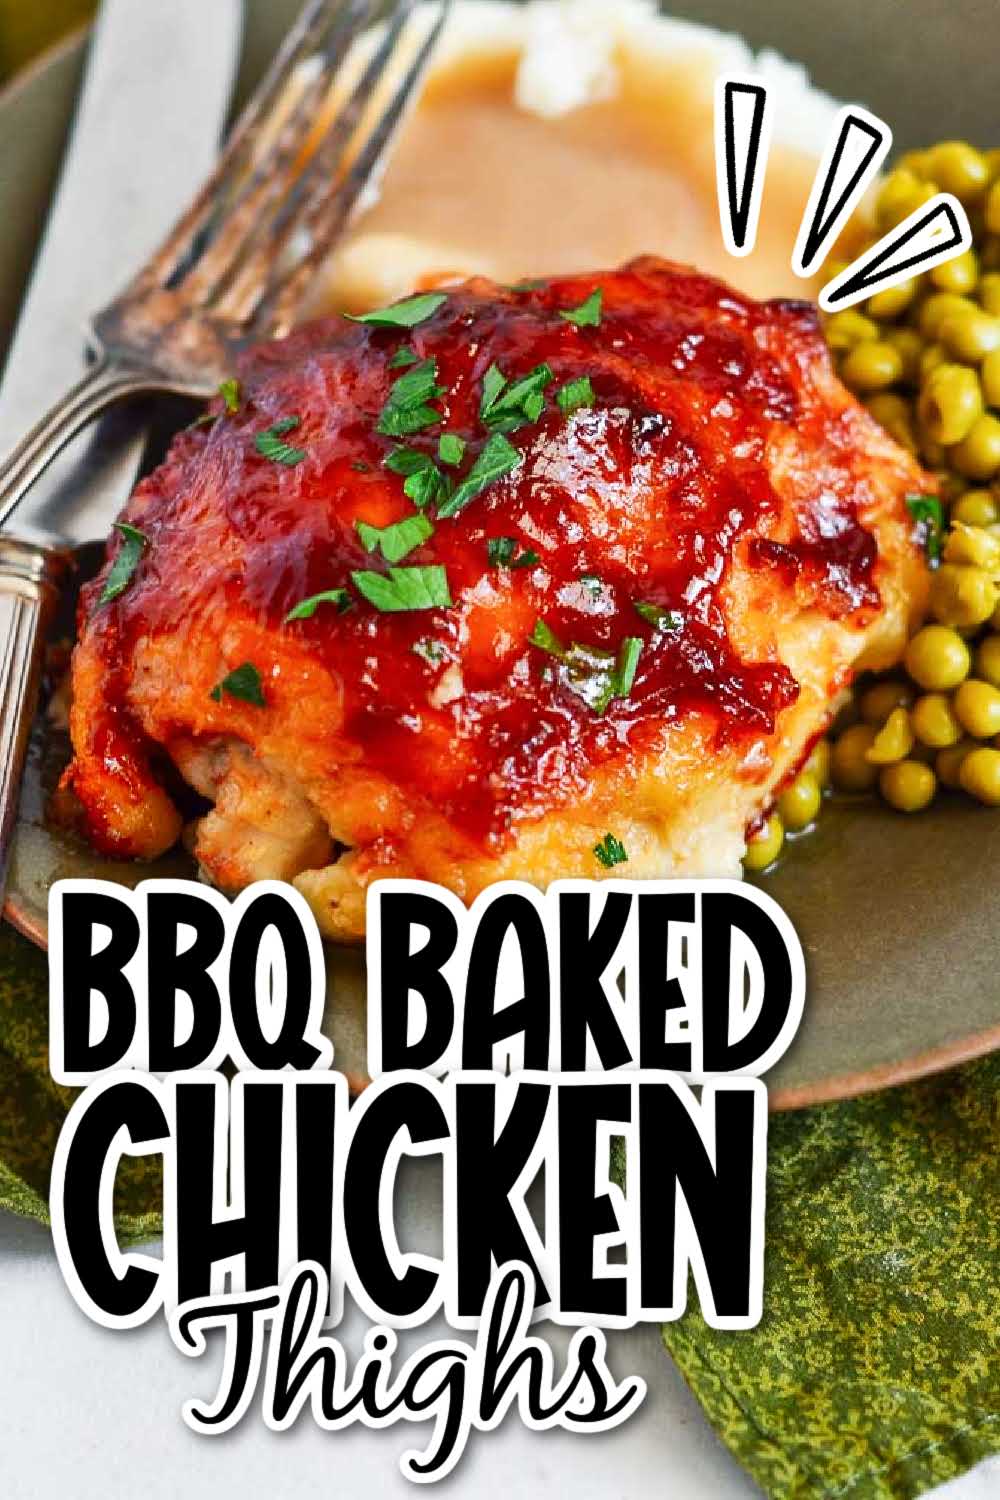 BBQ Baked Chicken Thigh on a plate with peas and mashed potatoes with text overlay.